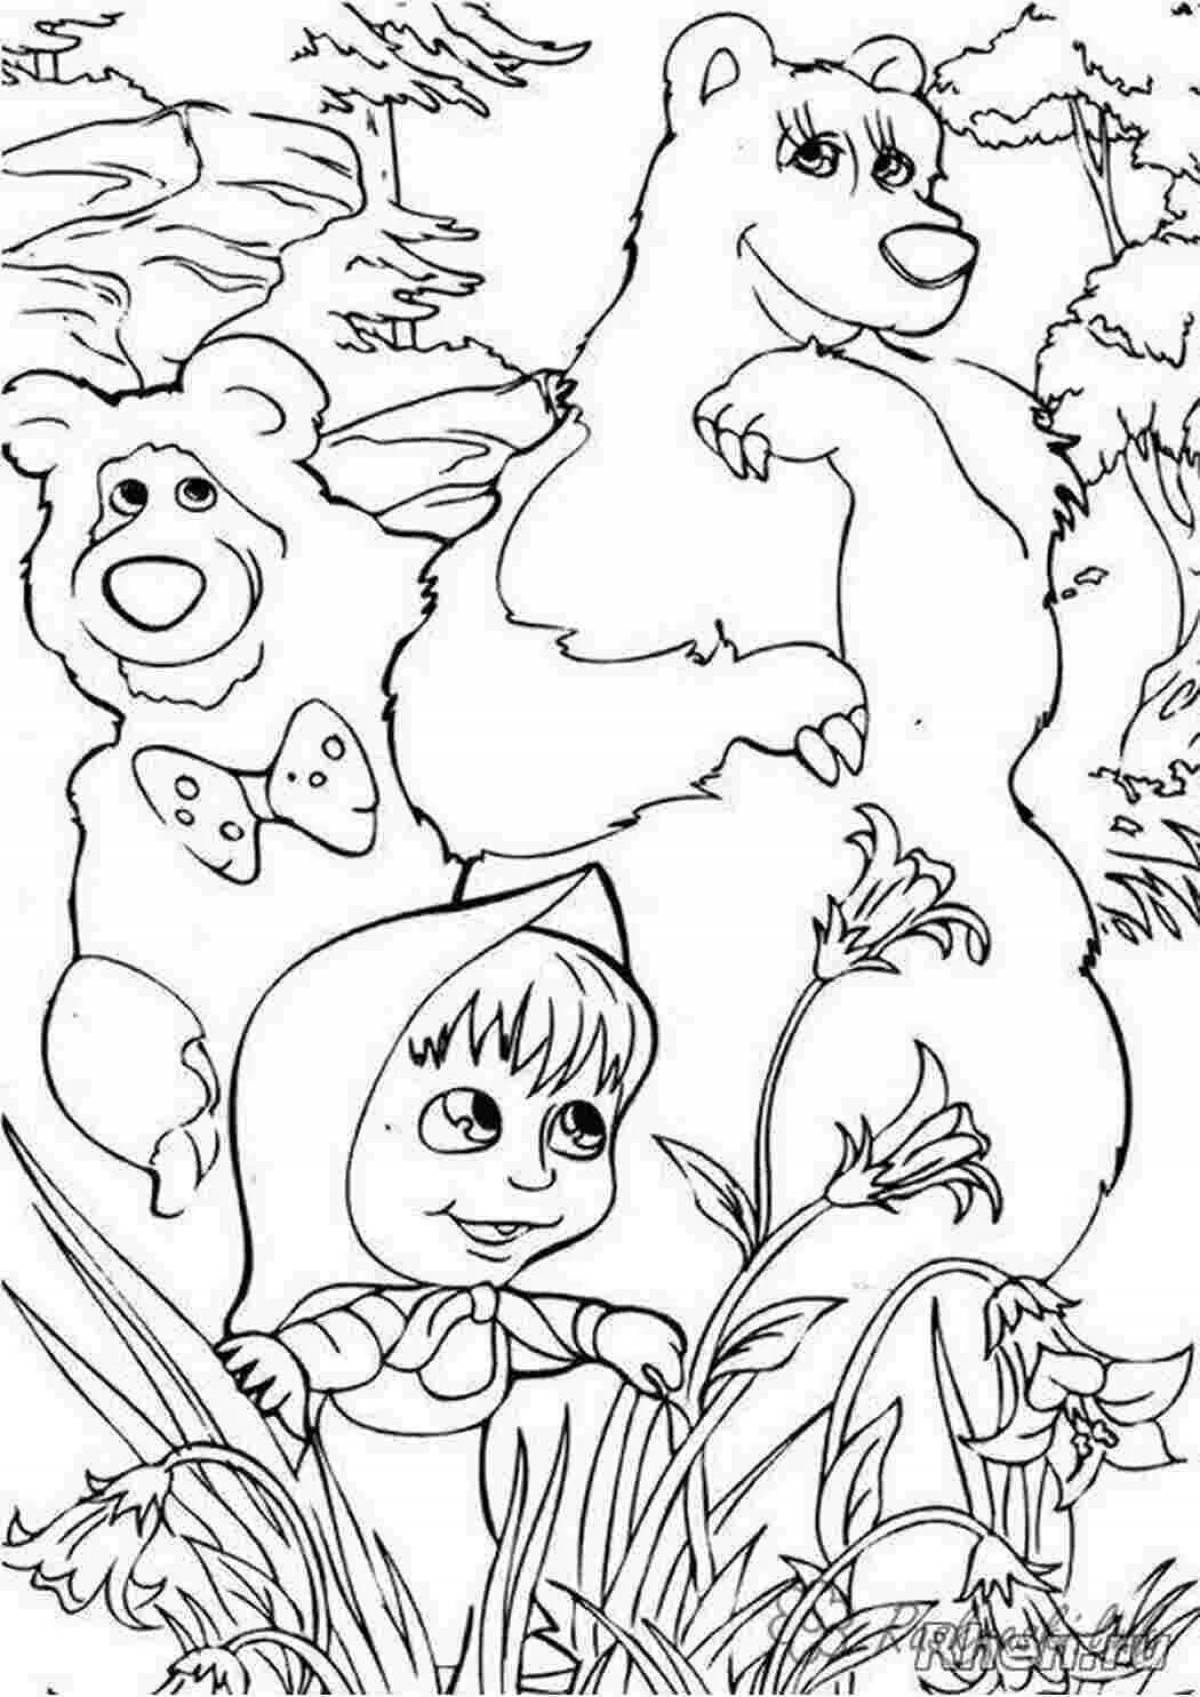 Coloring Masha and the bear with colored splashes